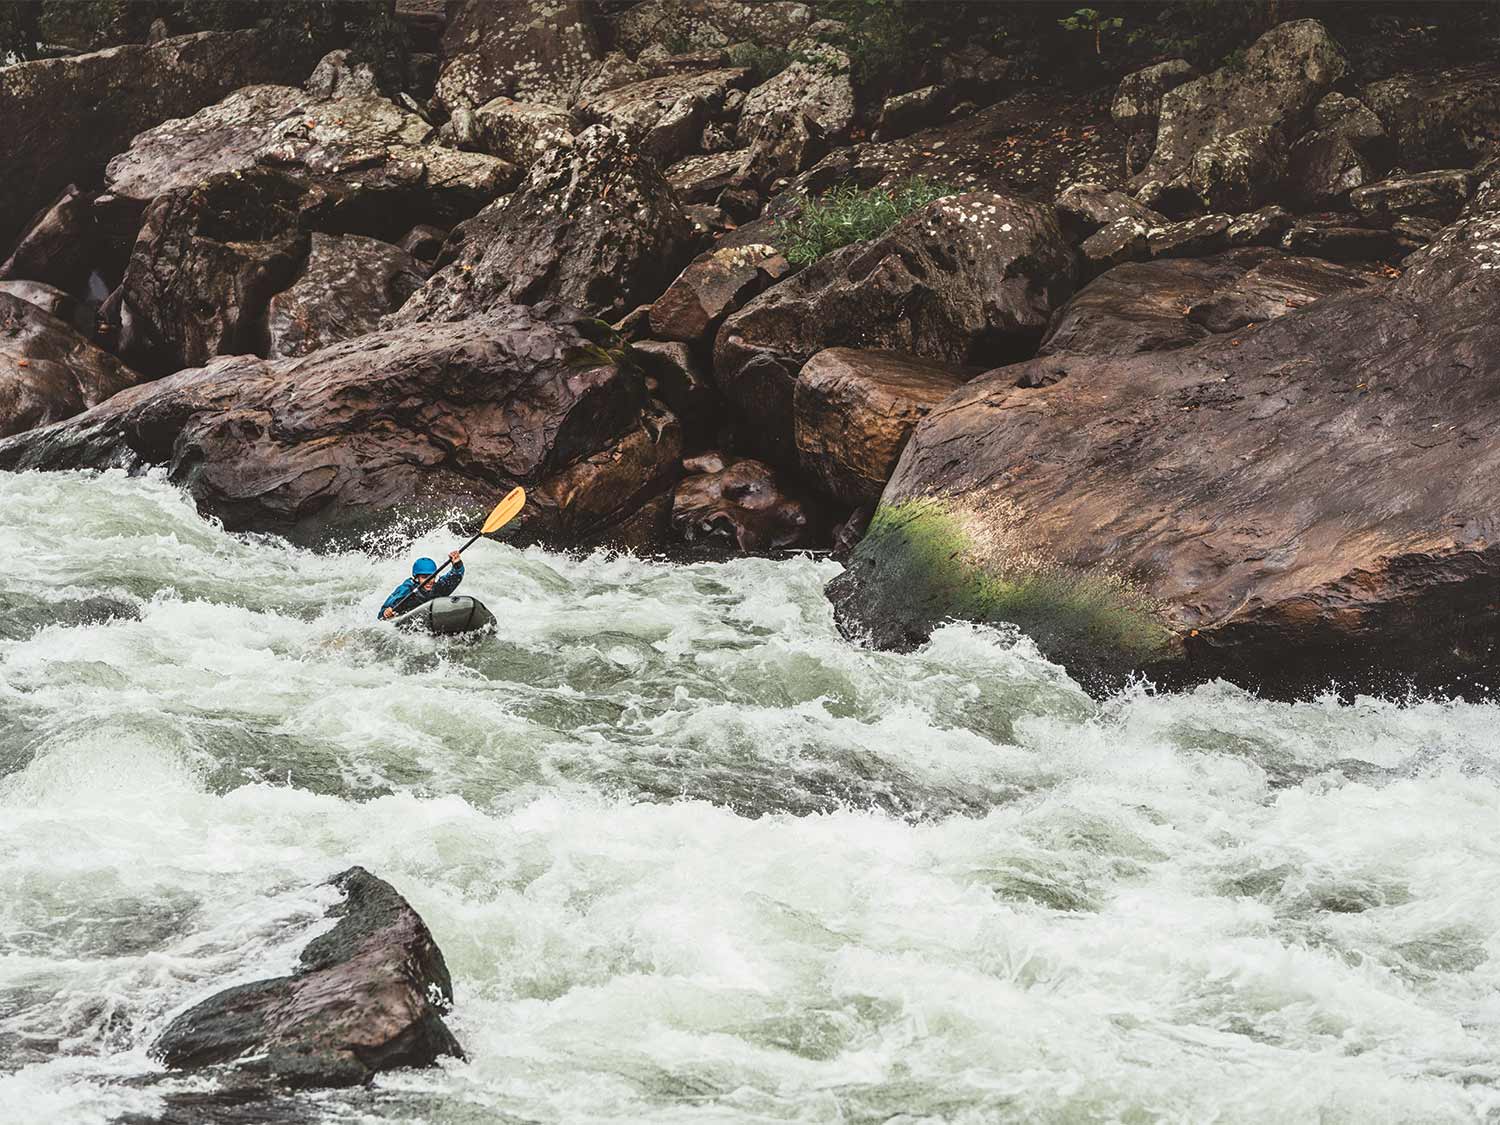 whitewater rafting down a river.